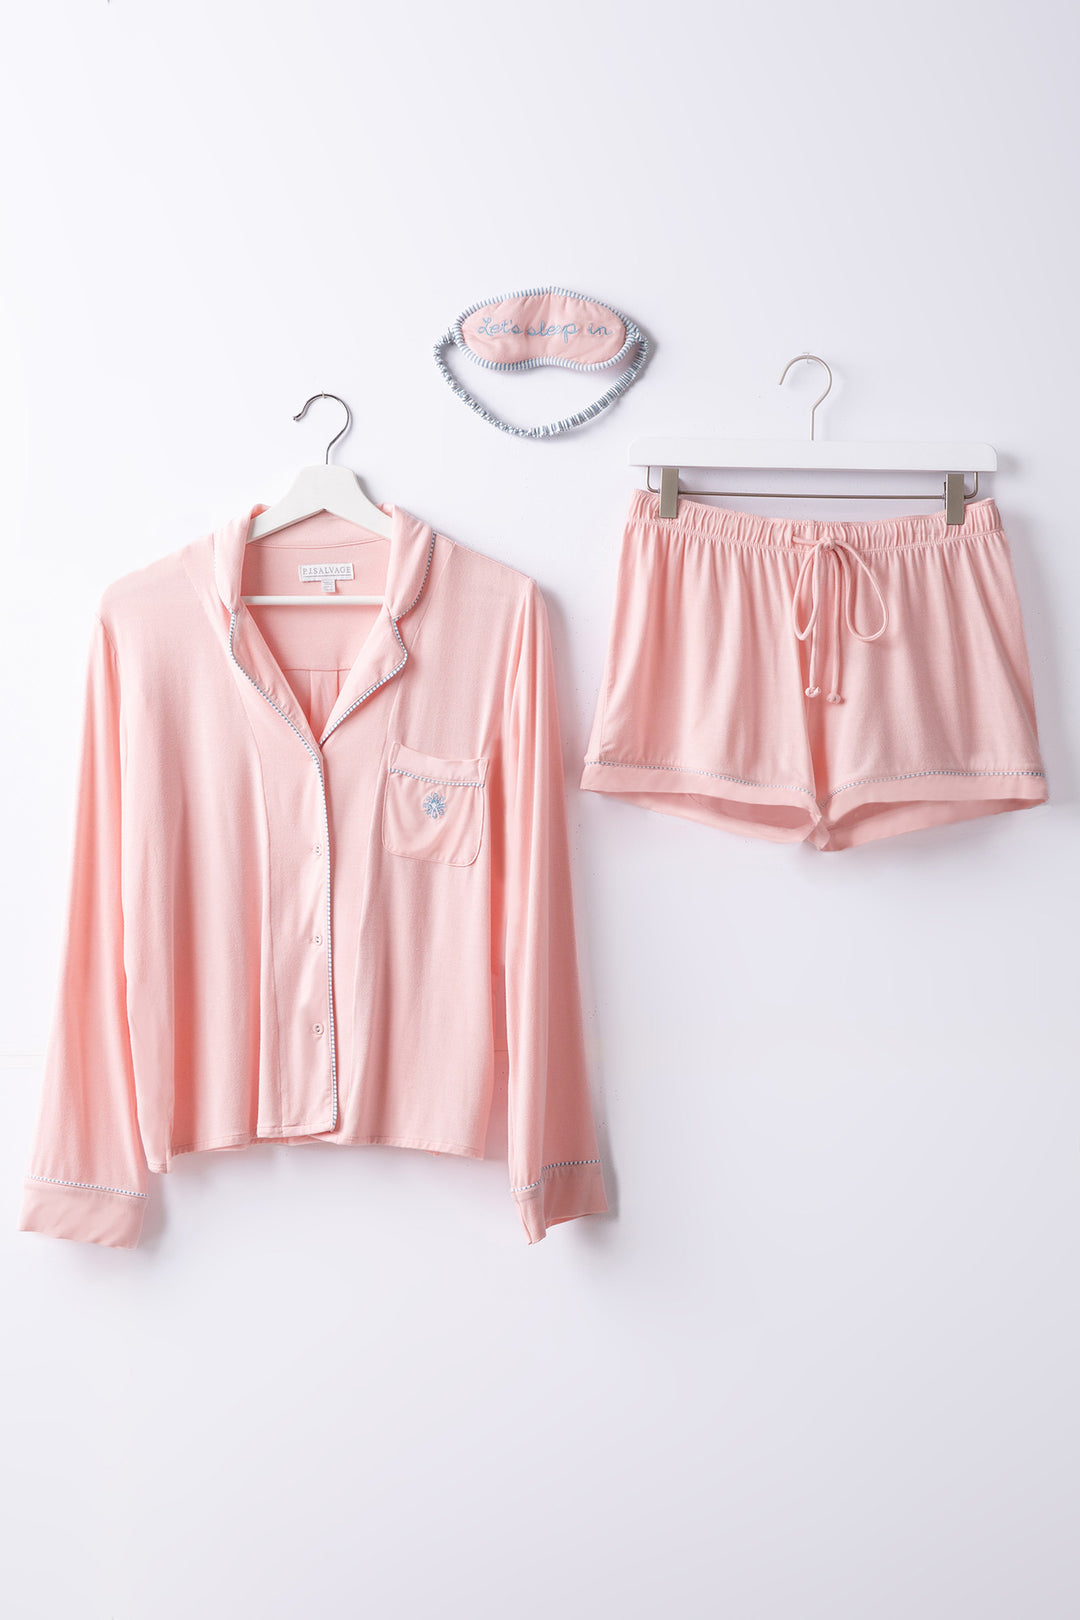 Pink PJ set long sleeve button top & short with striped piping. With embroidered sleep mask "Let's Sleep in".